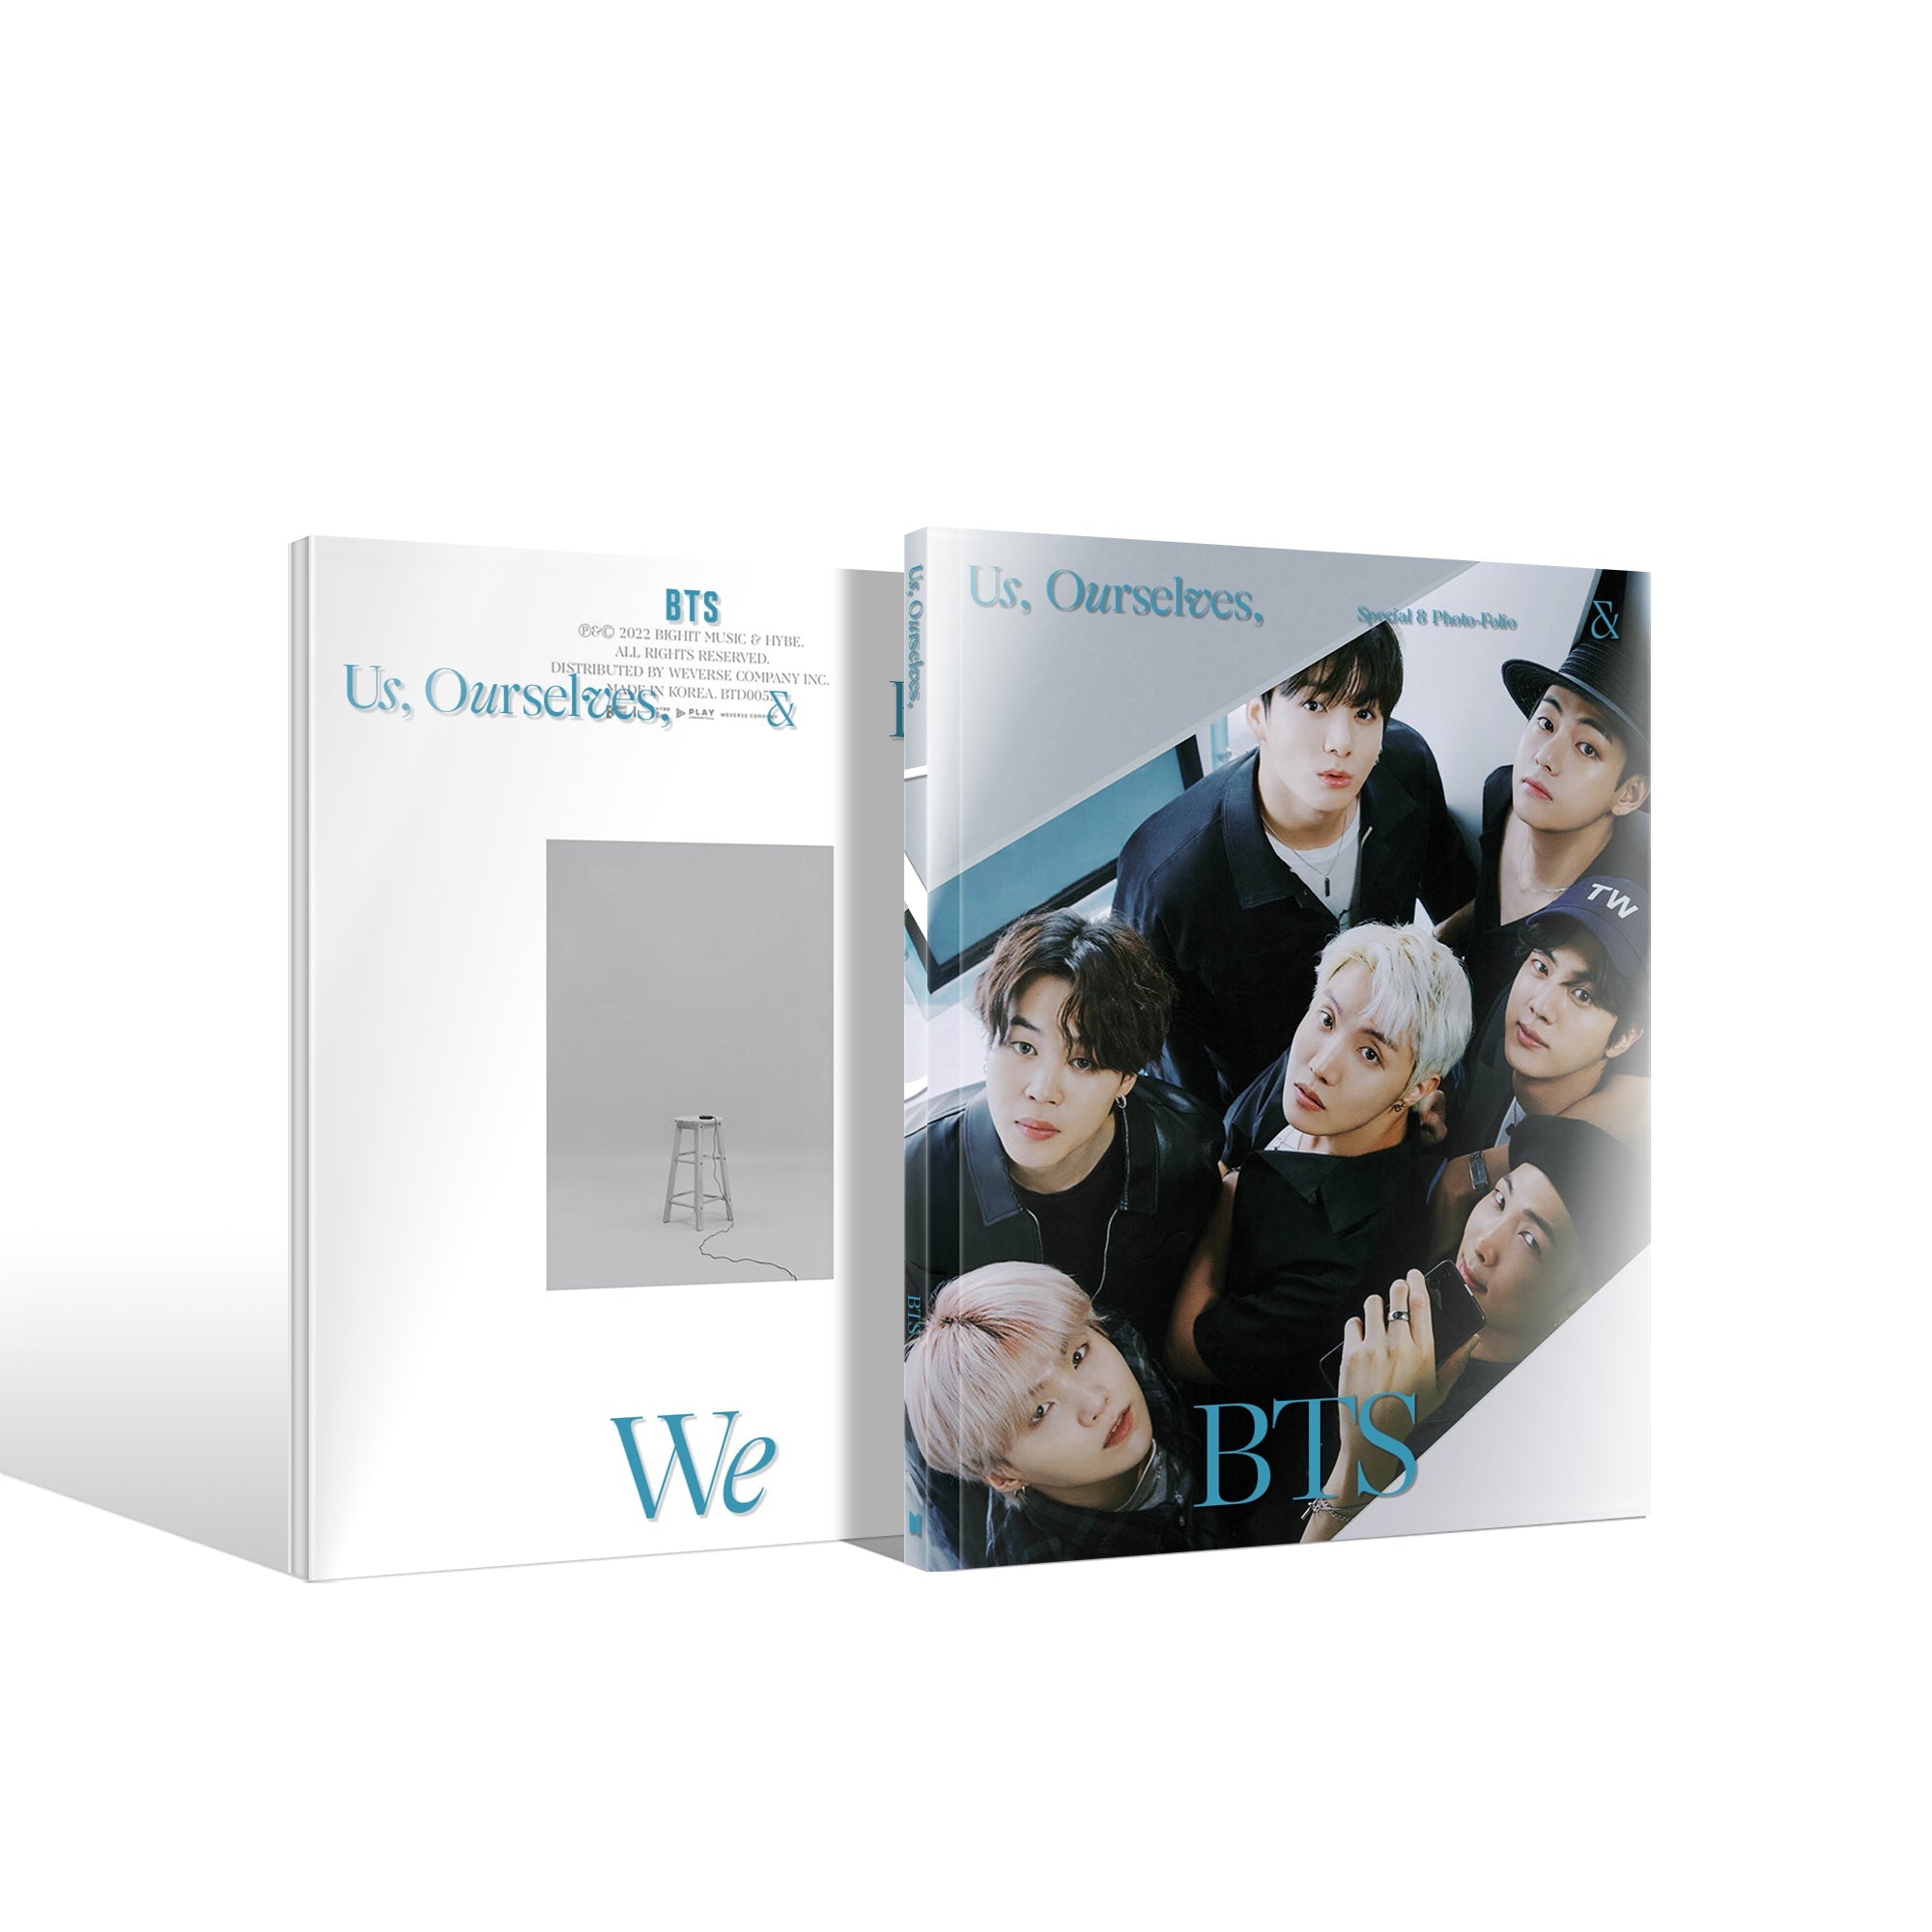 BTS - Special 8 Photo-Folio Us, Ourselves, and BTS 'WE' "Restock"